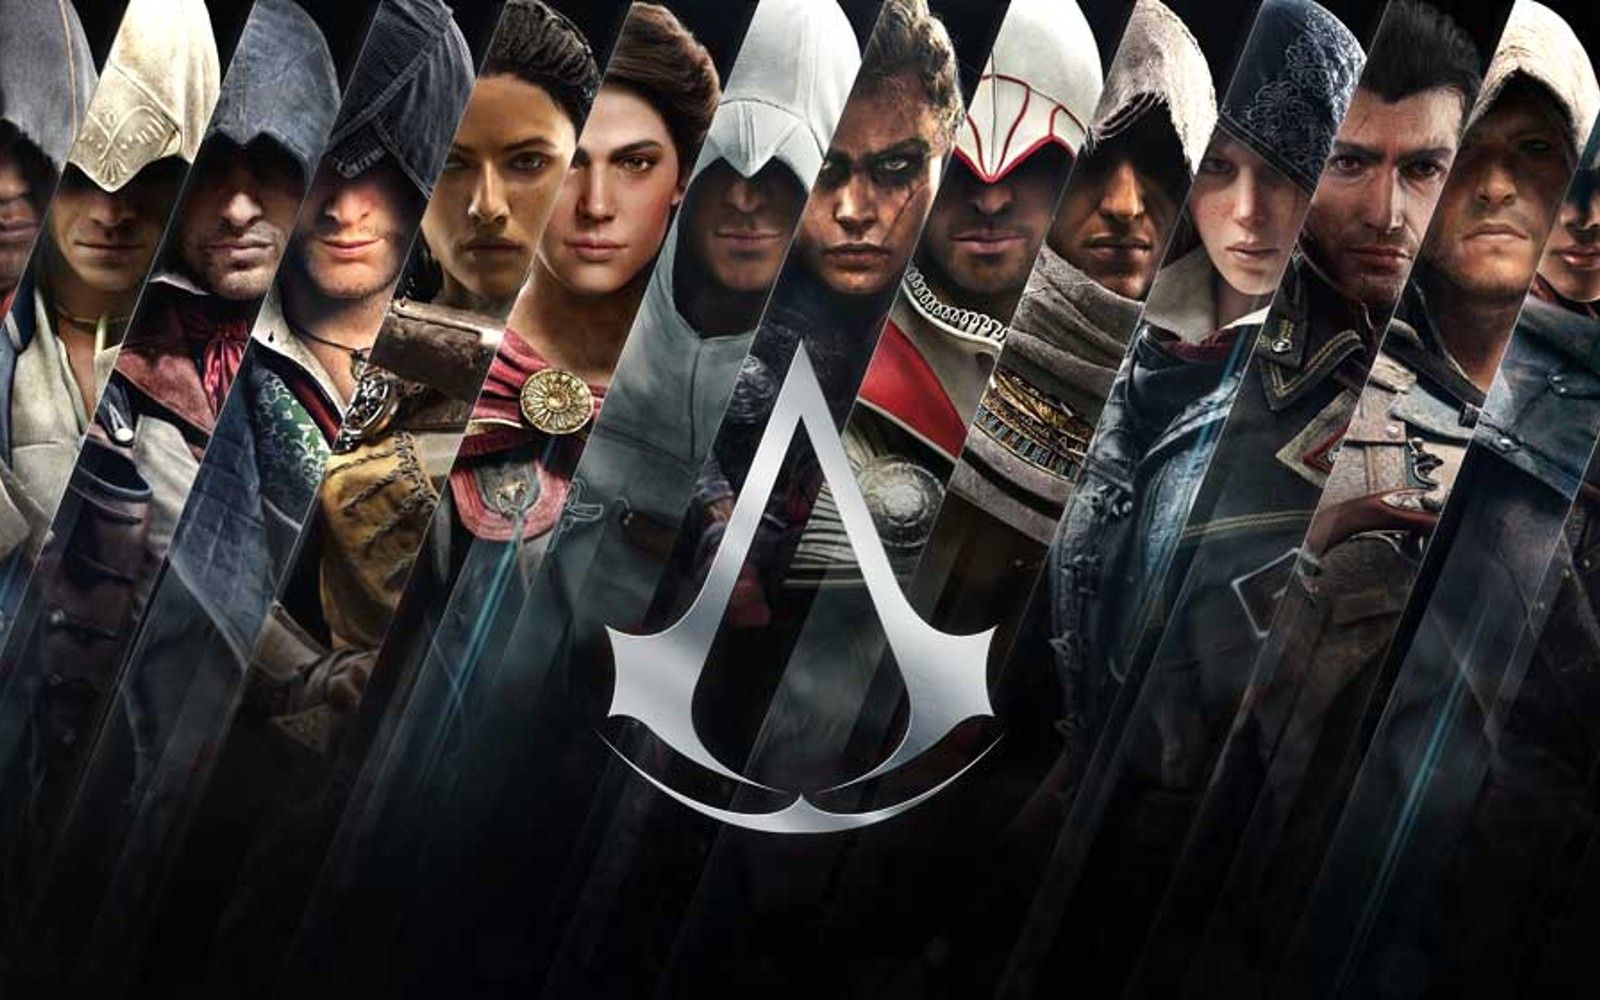 Images of the many protagonists of the Assassin's Creed franchise as seen lined up next to each other behind the franchises symbol.